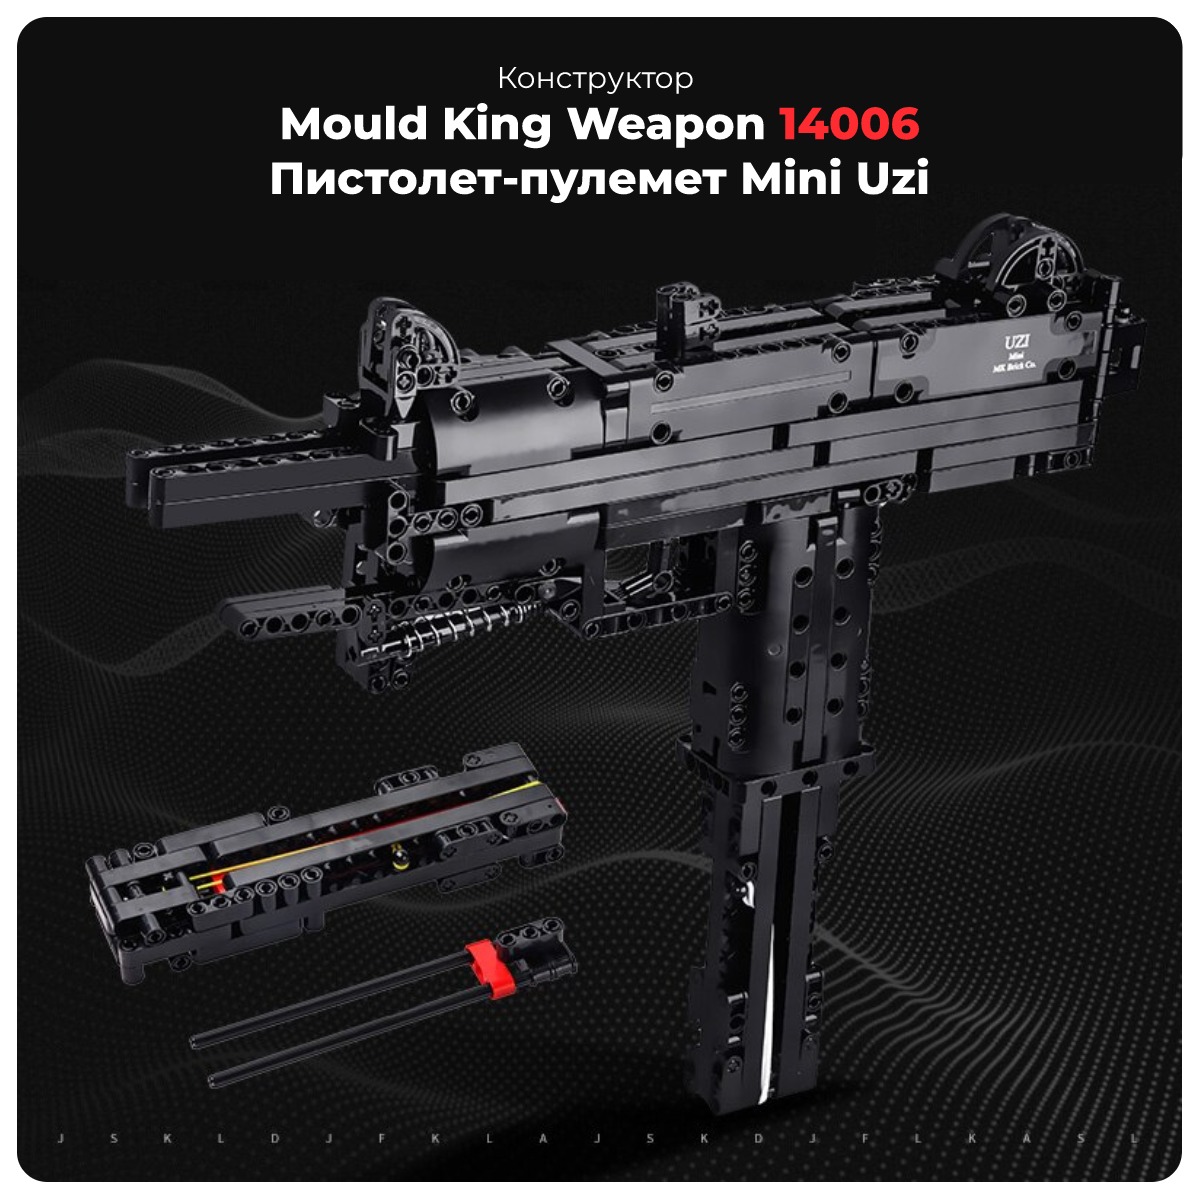 Mould-King-Weapon-14006-01